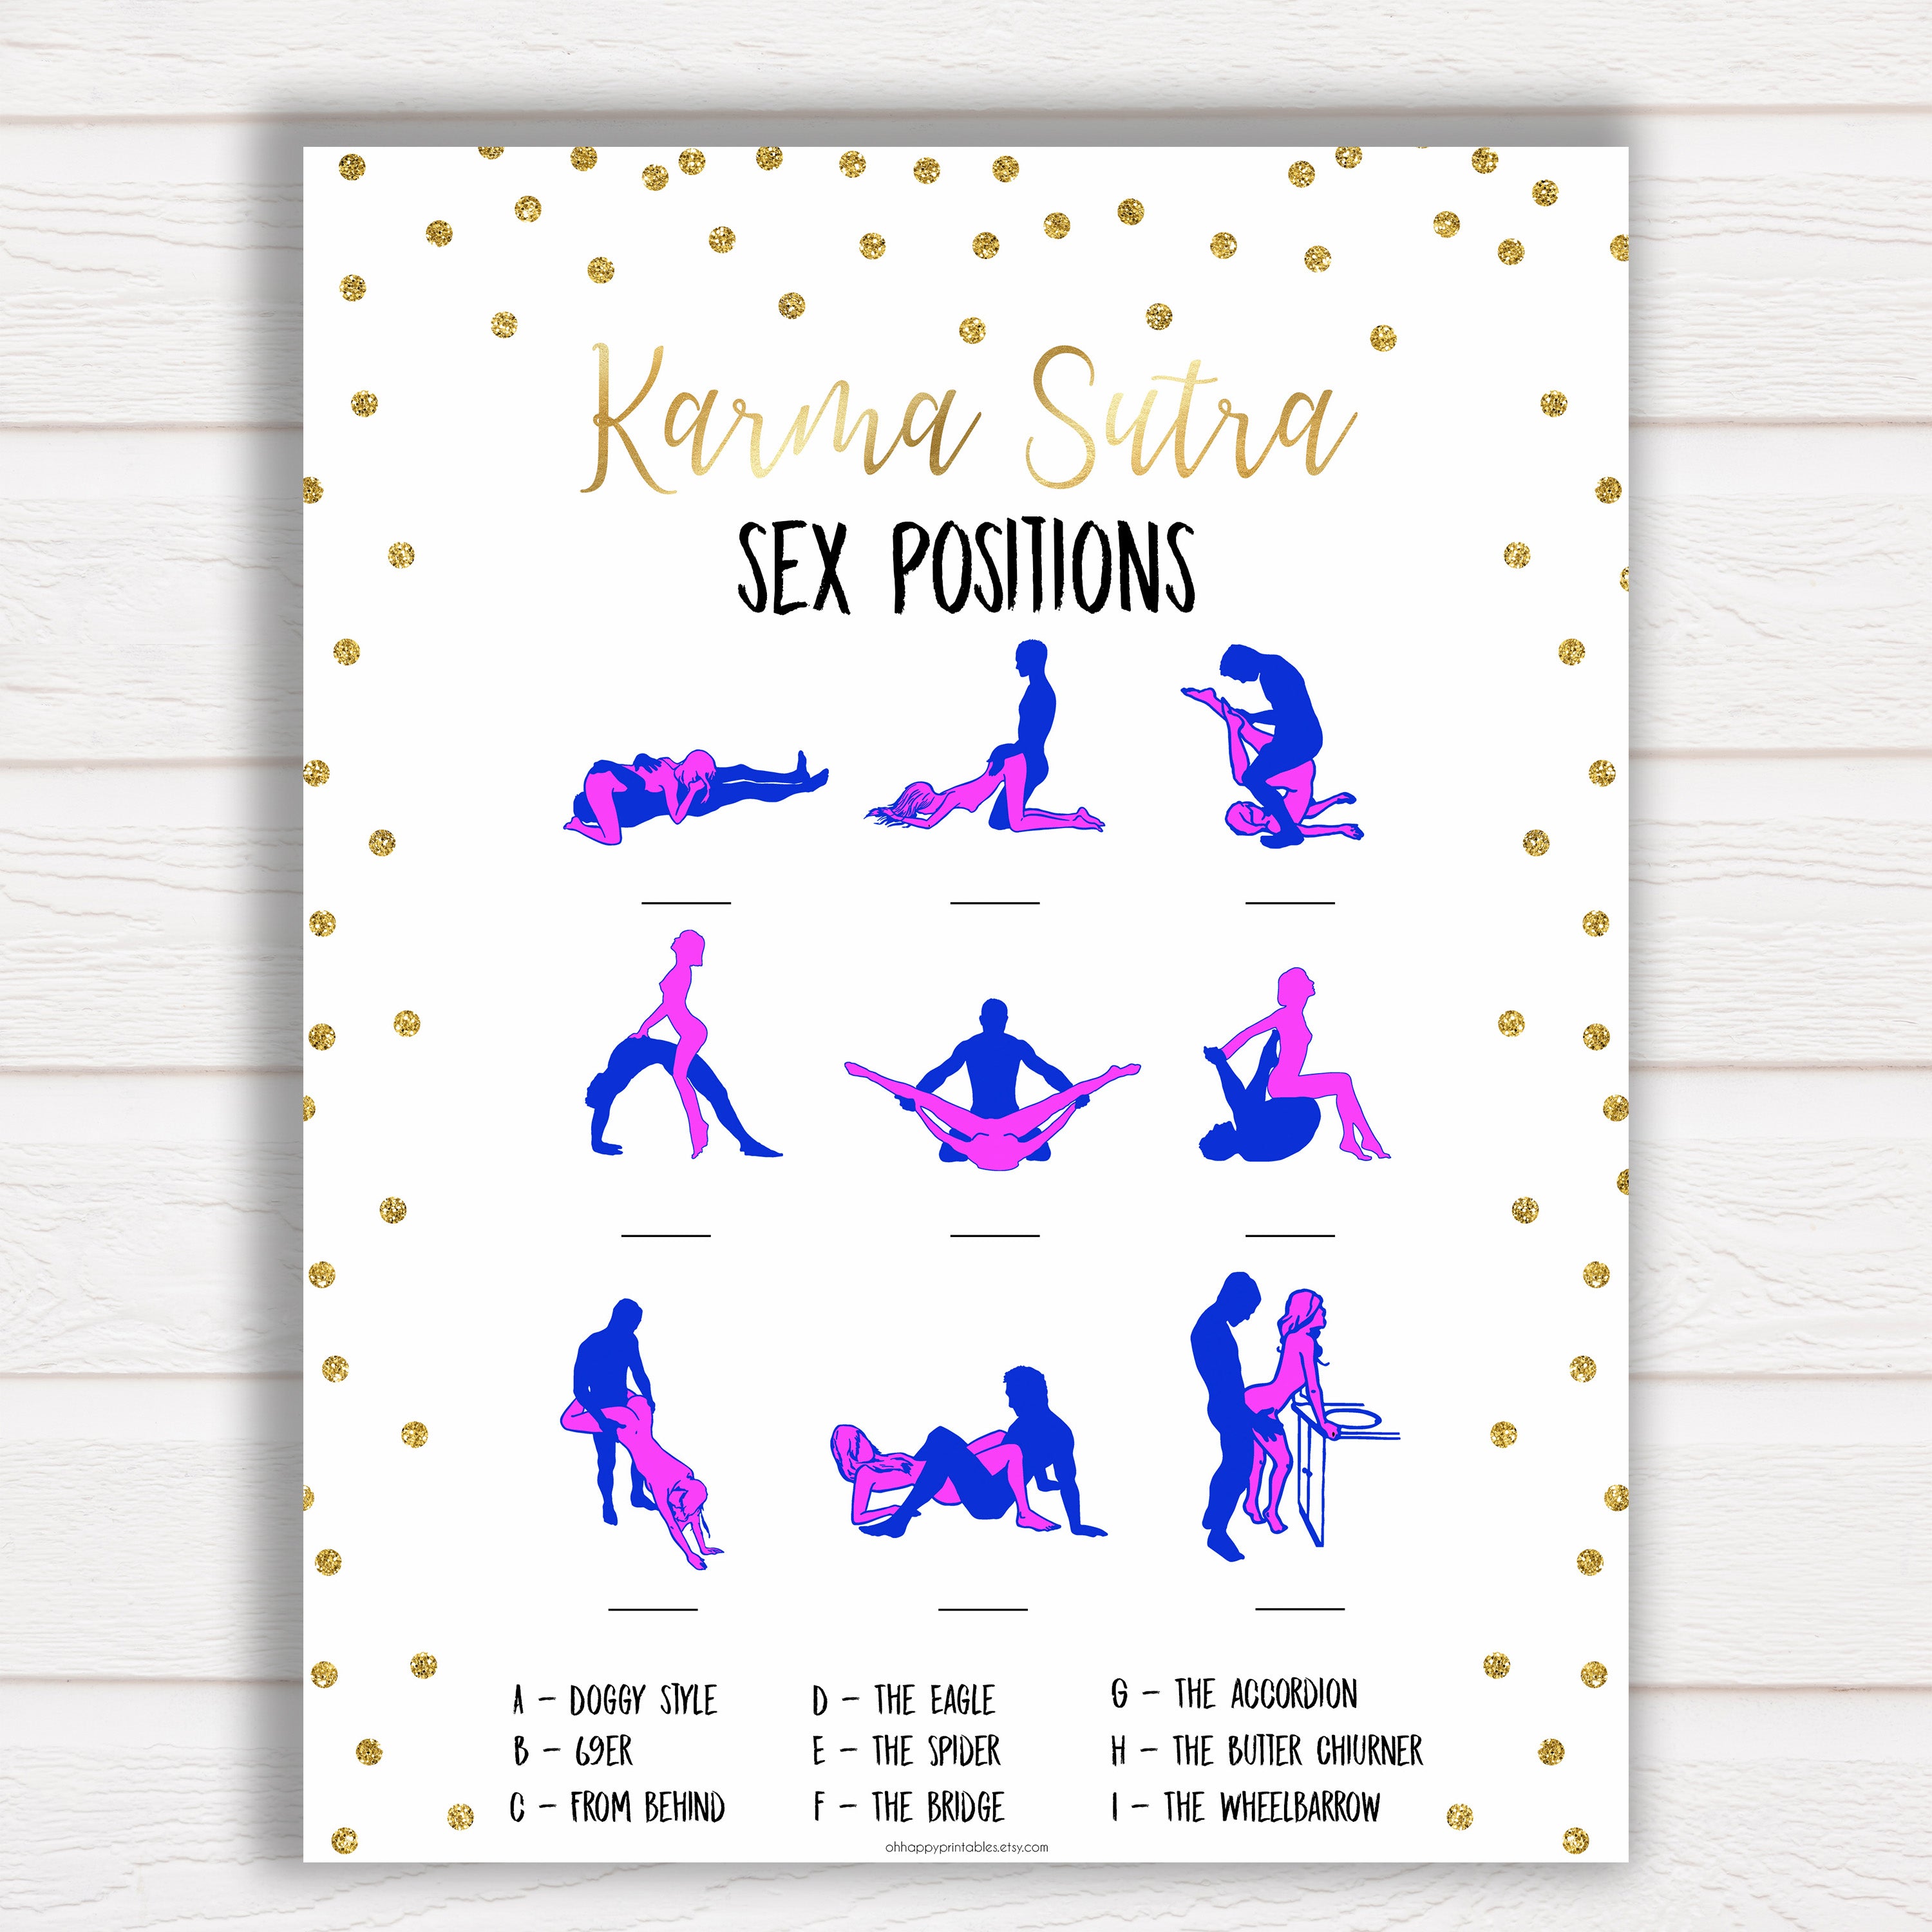 Sex position game, karma sutra sex game, bridal shower games, baby shower games, sex games 